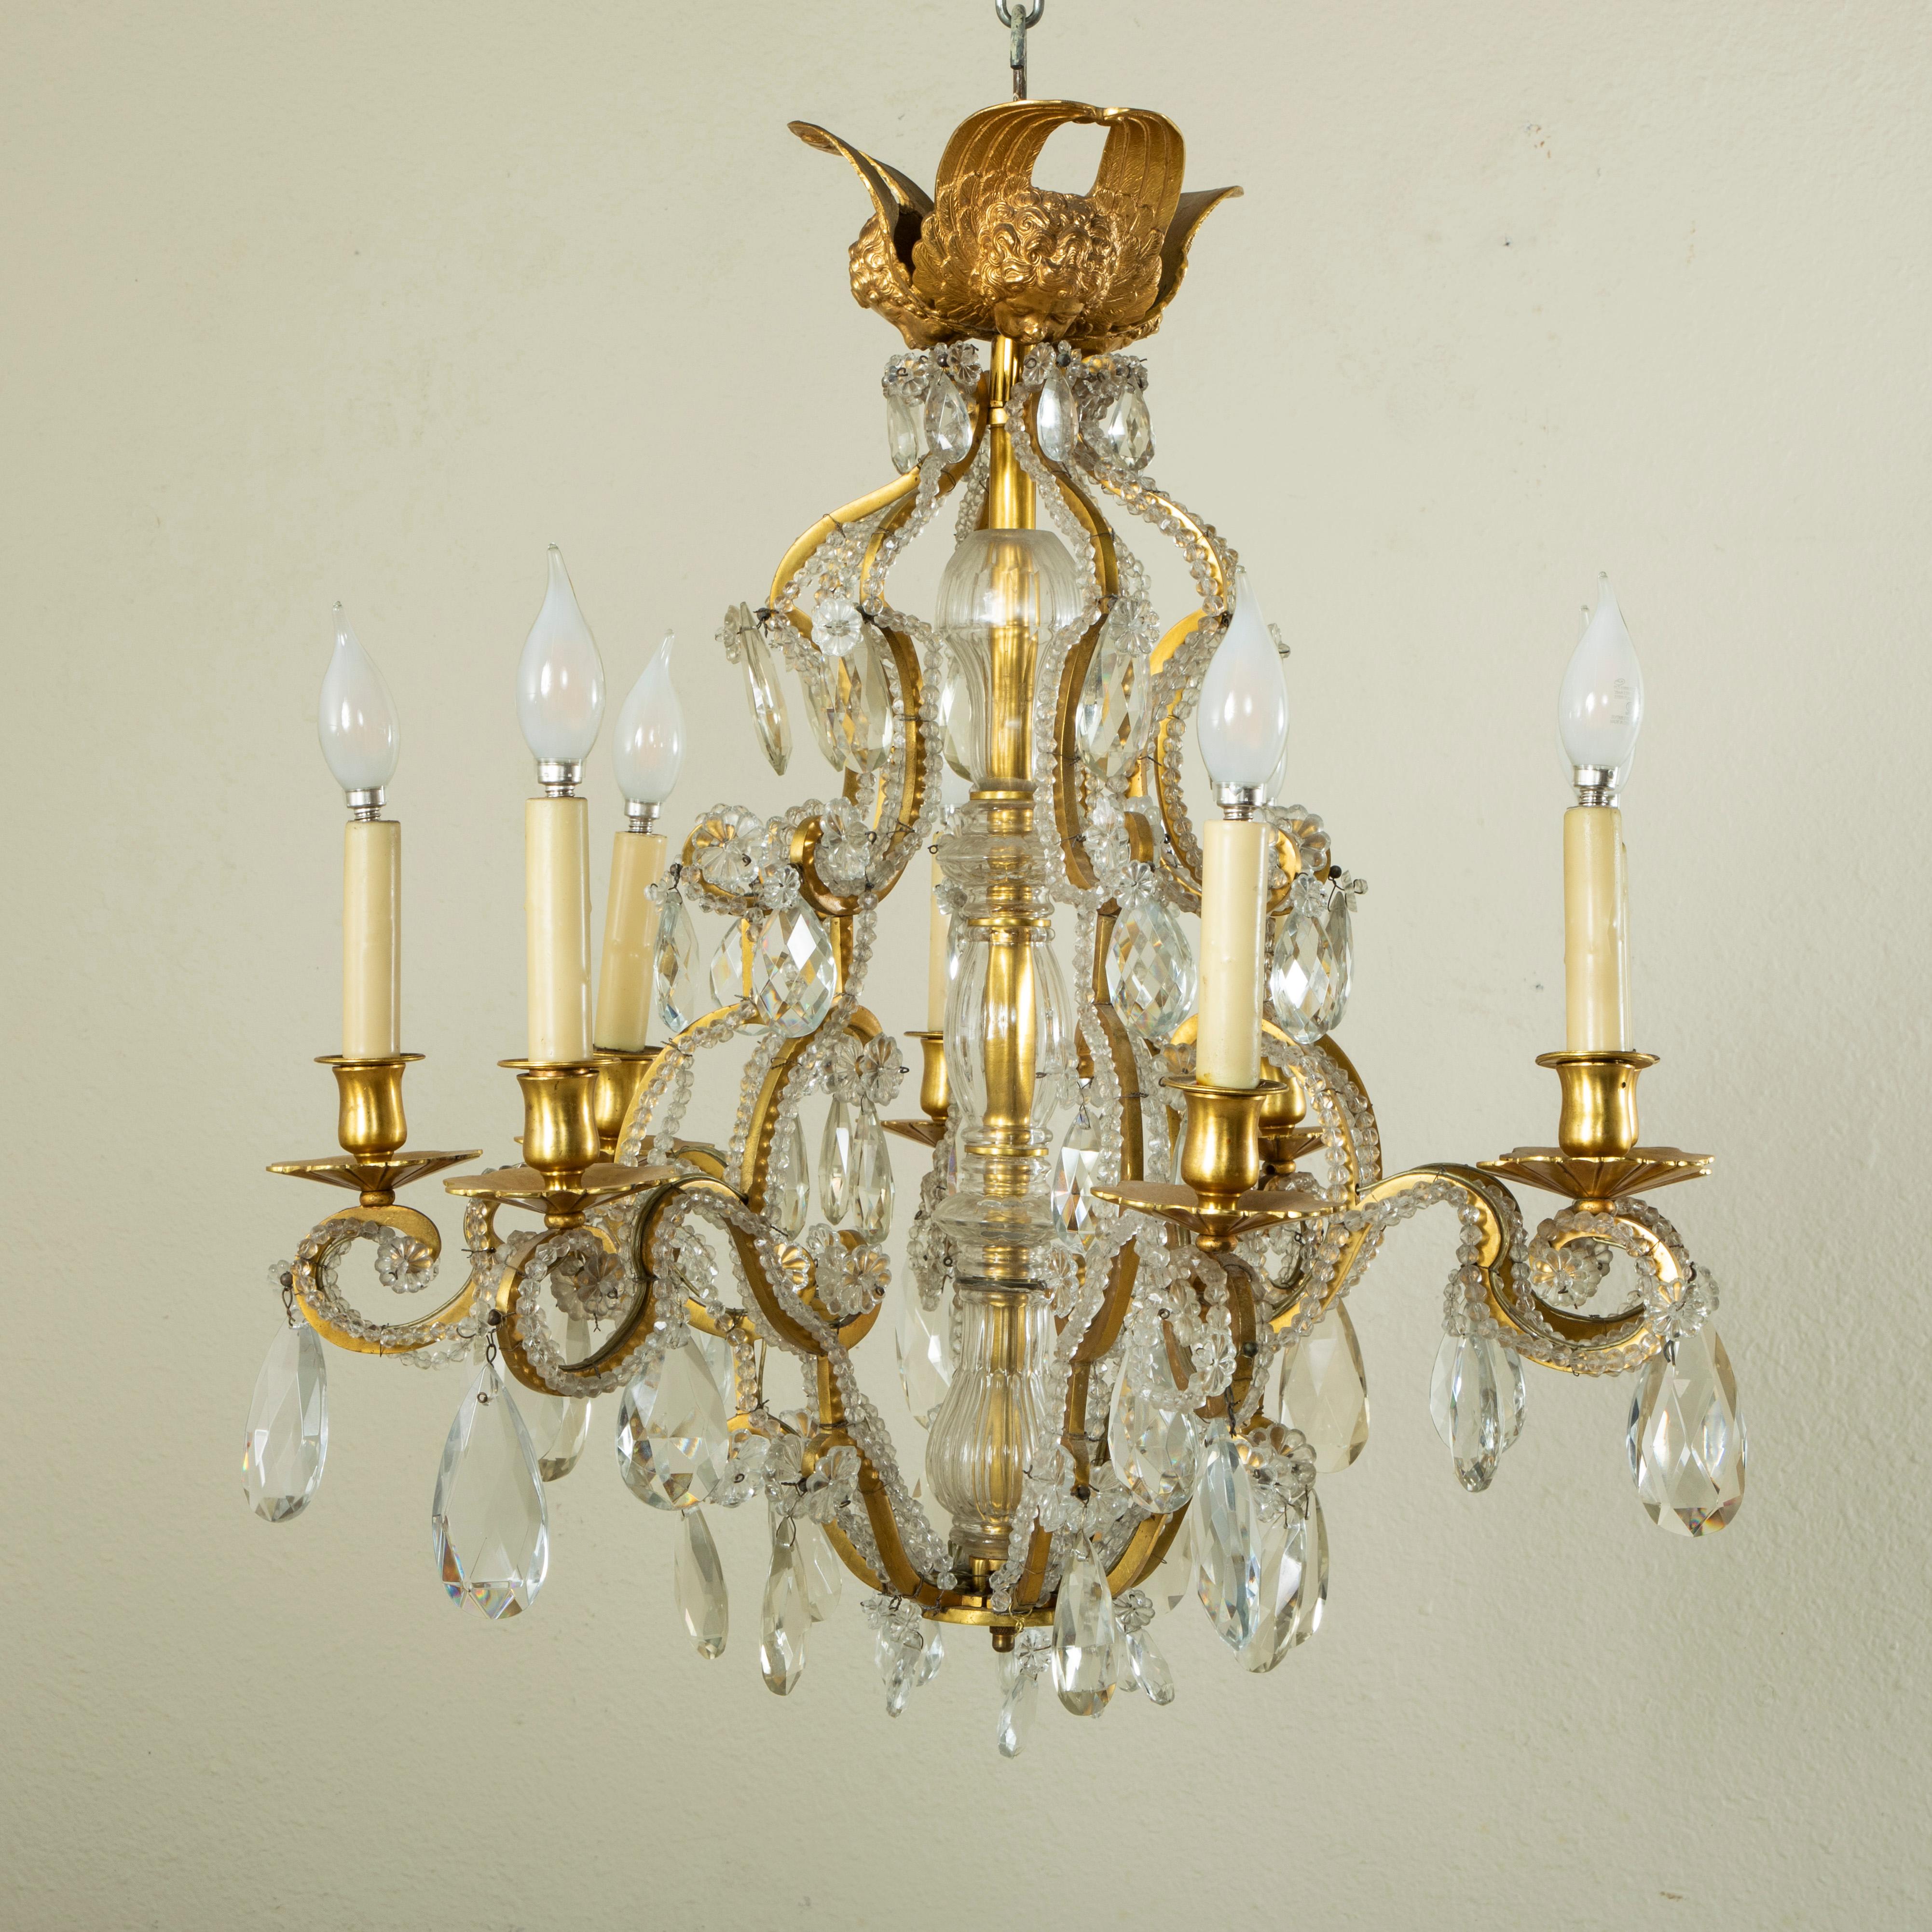 From the mid-twentieth century, this beautiful gilt bronze chandelier features eight elegantly curved arms lined with beaded crystals, which extend from a tall central glass column. The chandelier is appointed with crystal faceted pear drops,